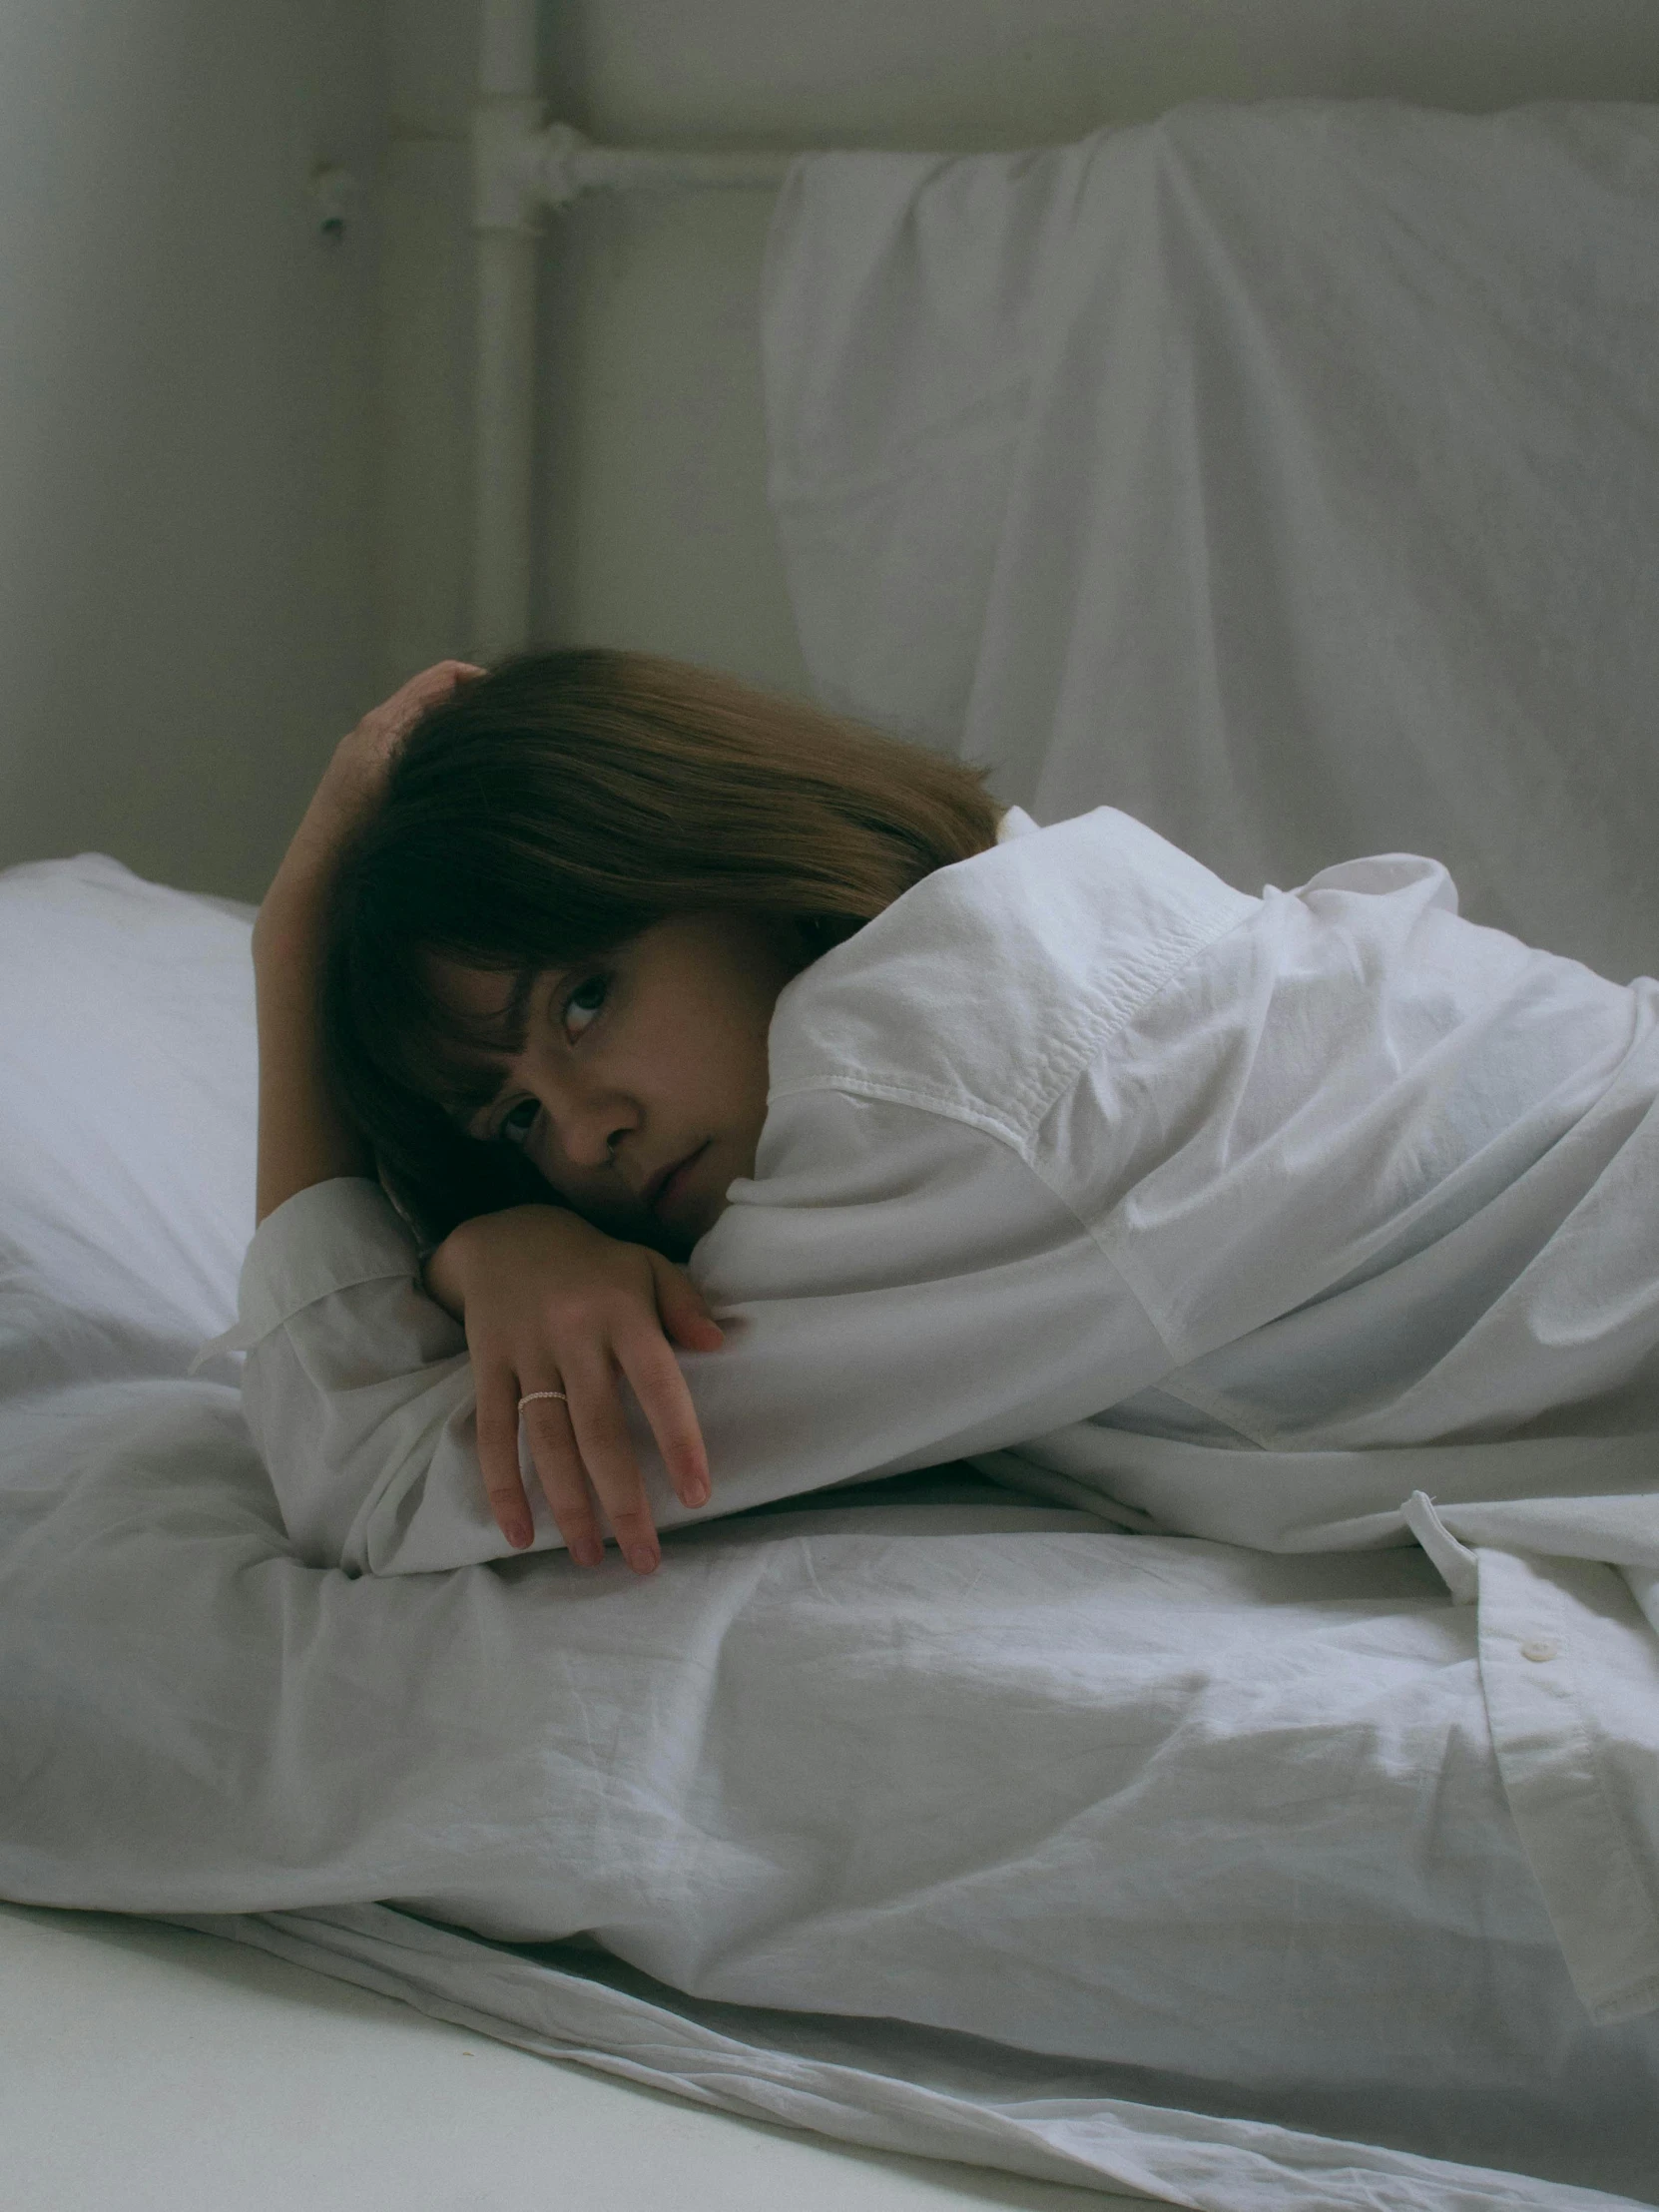 a young woman is tucked into bed with sheets